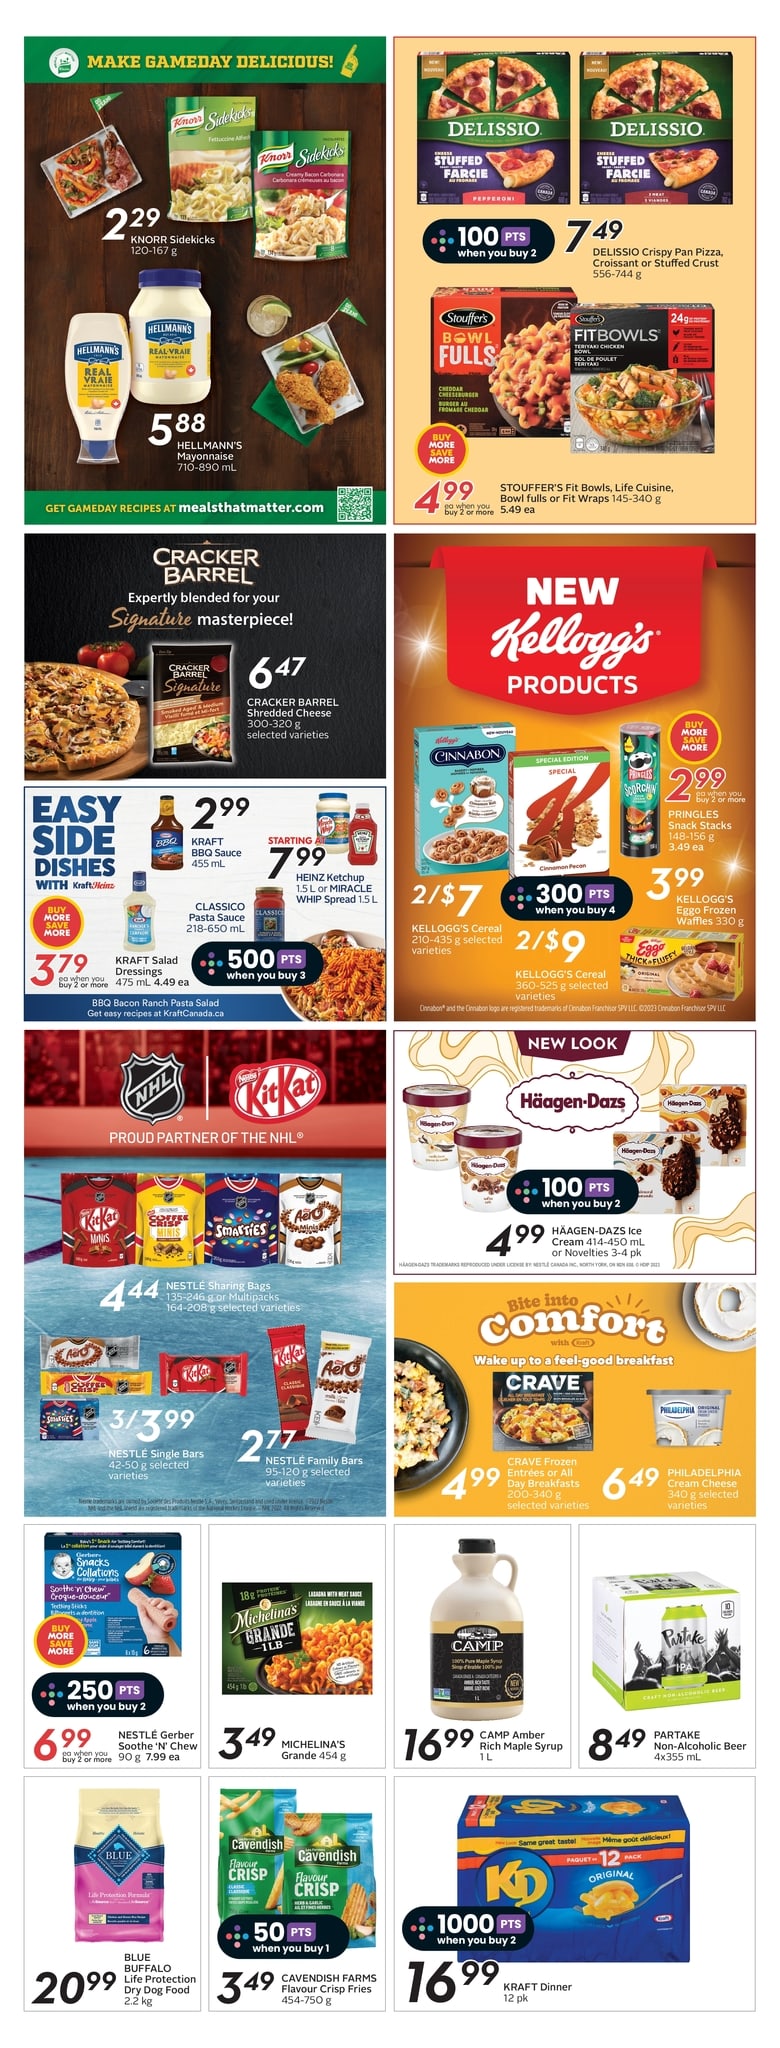 Sobeys - Weekly Flyer Specials - Page 18